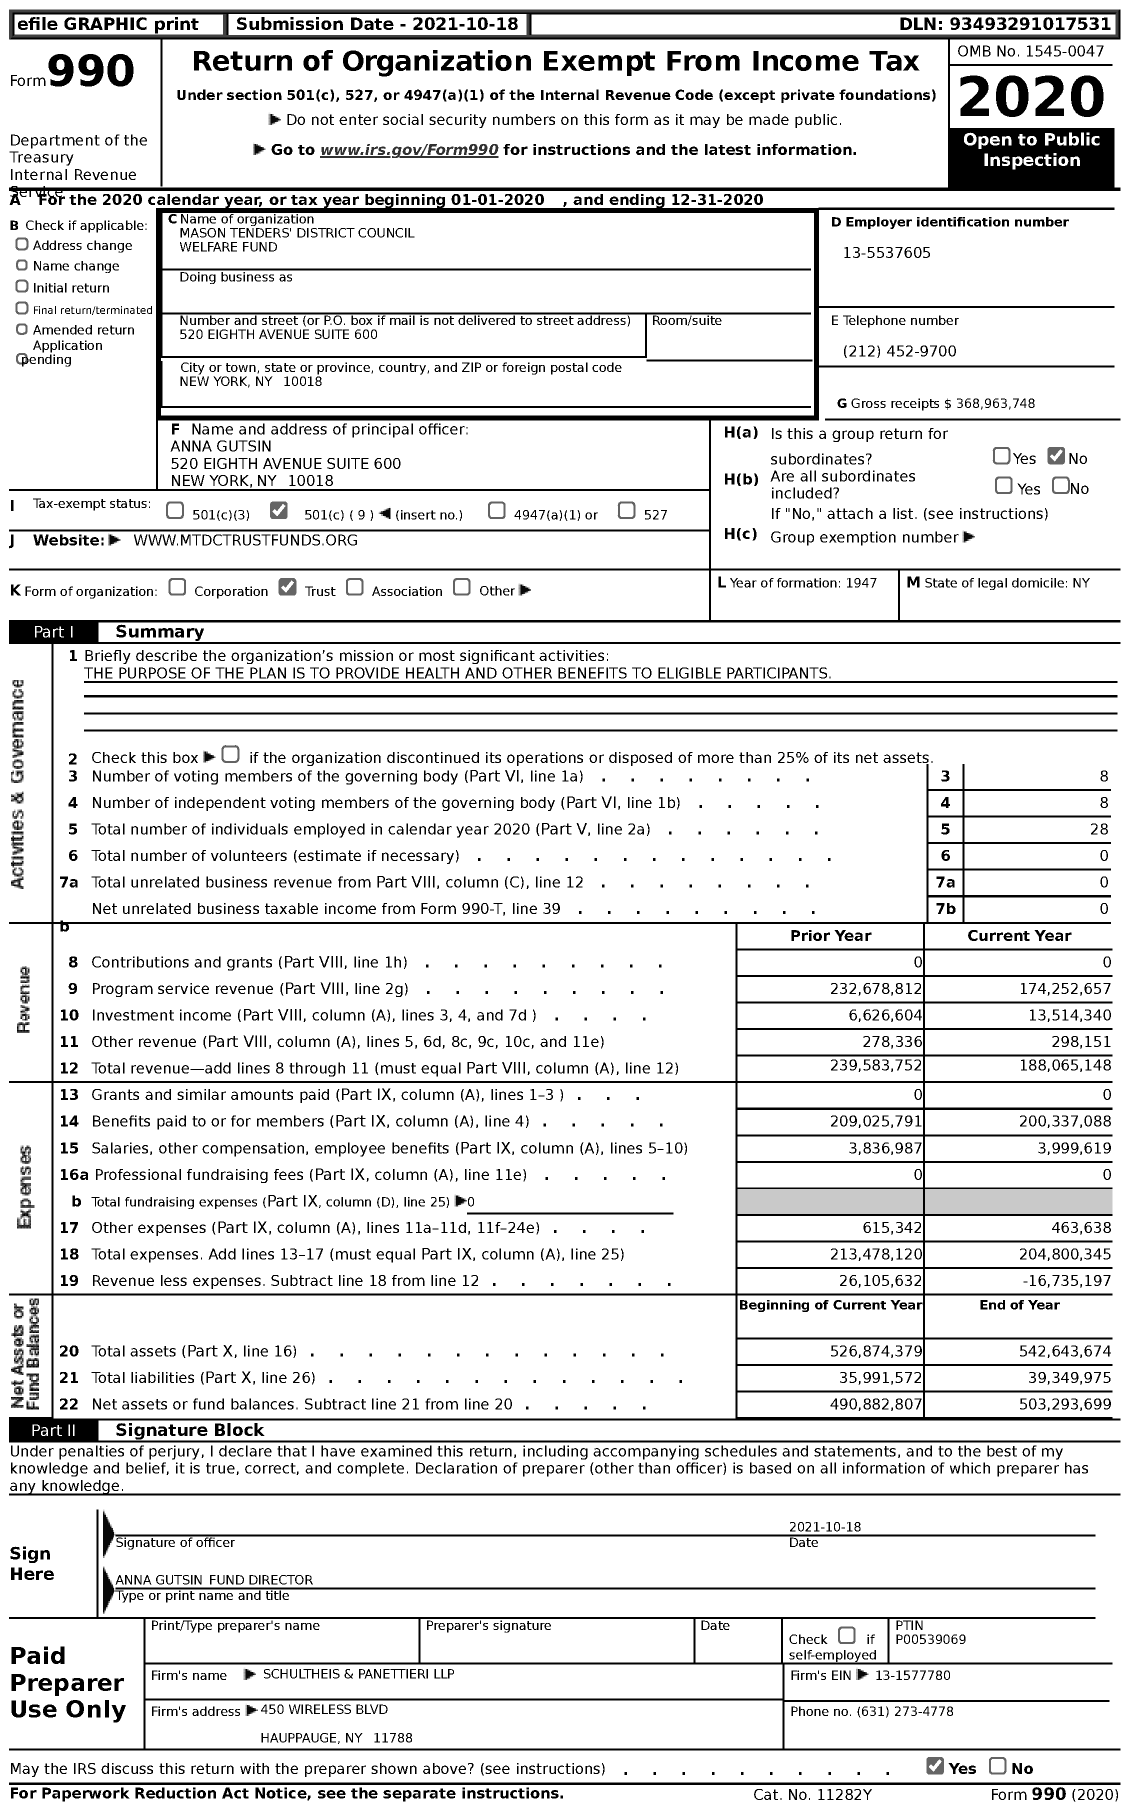 Image of first page of 2020 Form 990 for Mason Tenders' District Council Welfare Fund